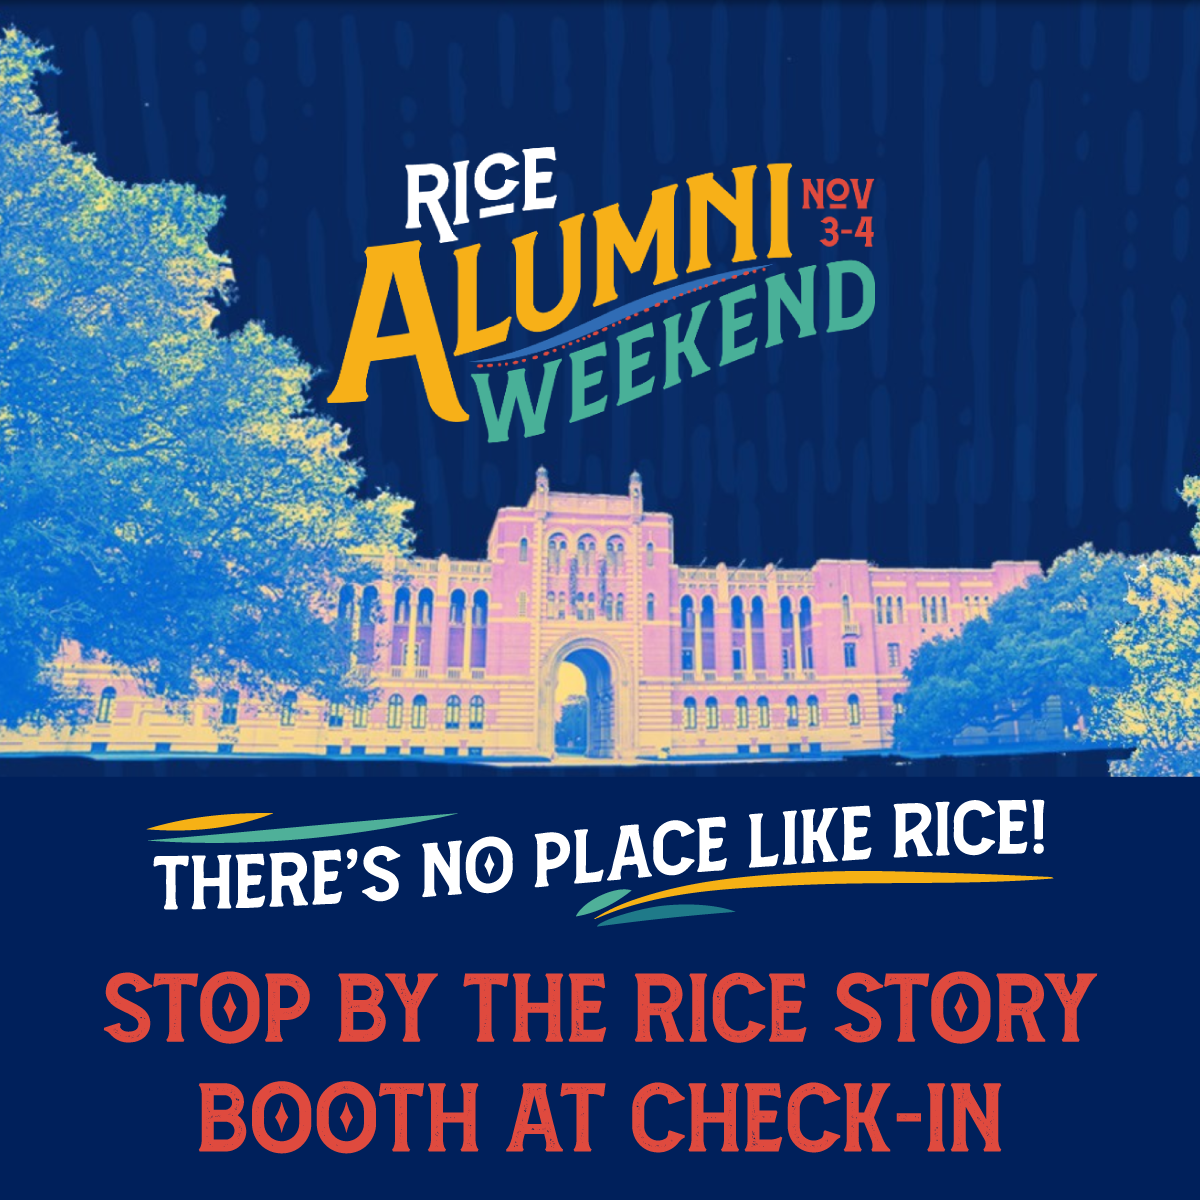 There's no place like Rice